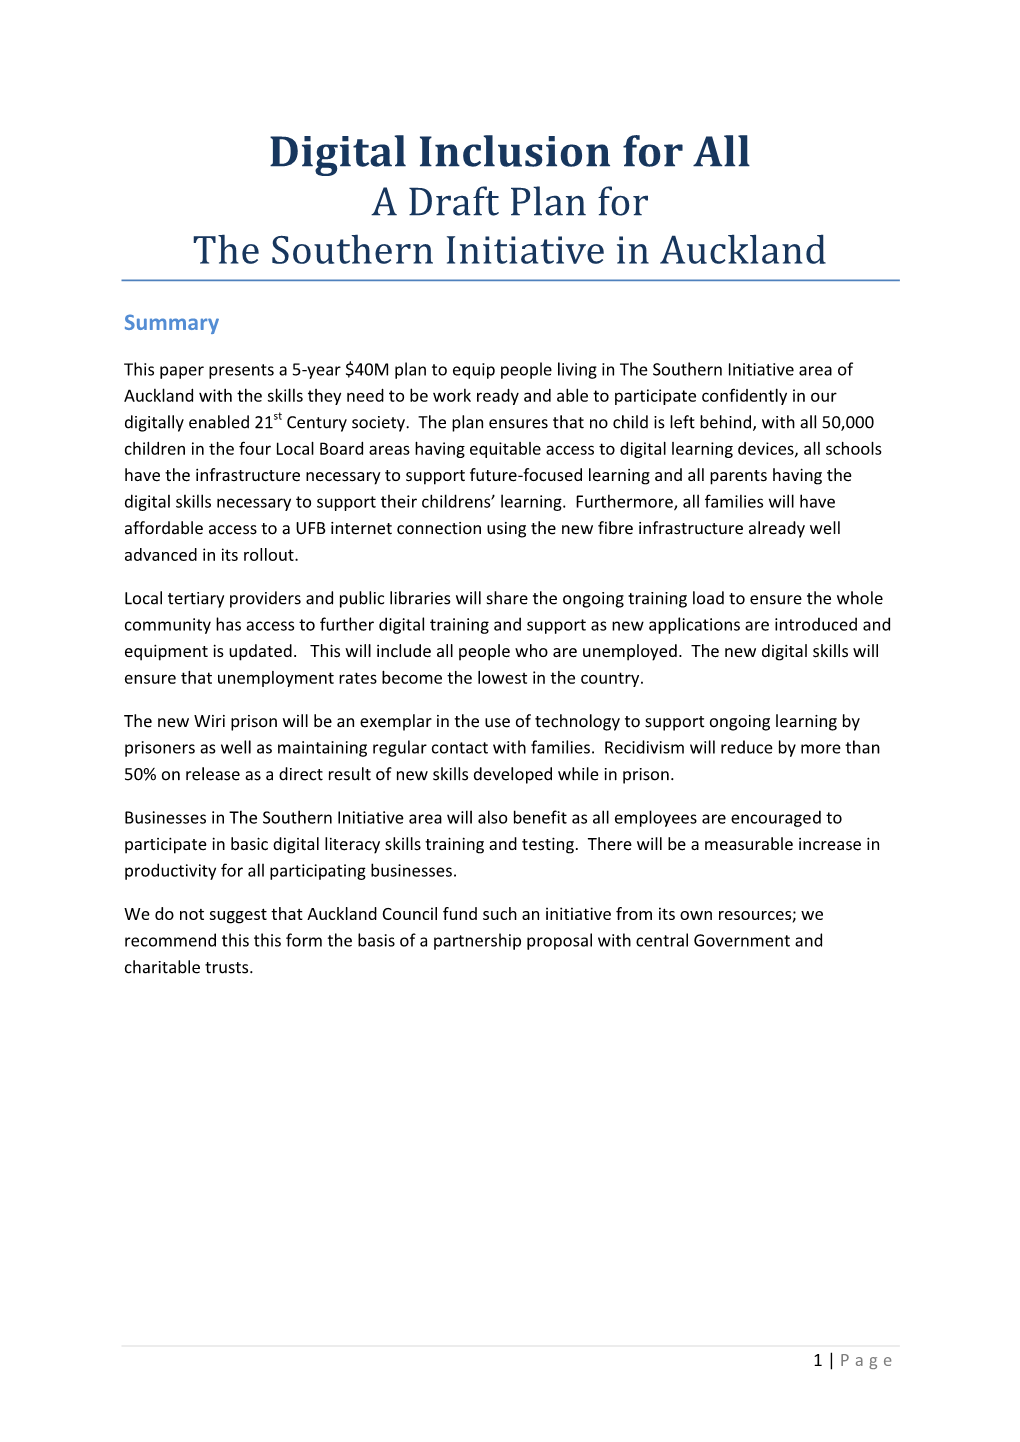 Digital Inclusion for All a Draft Plan for the Southern Initiative in Auckland